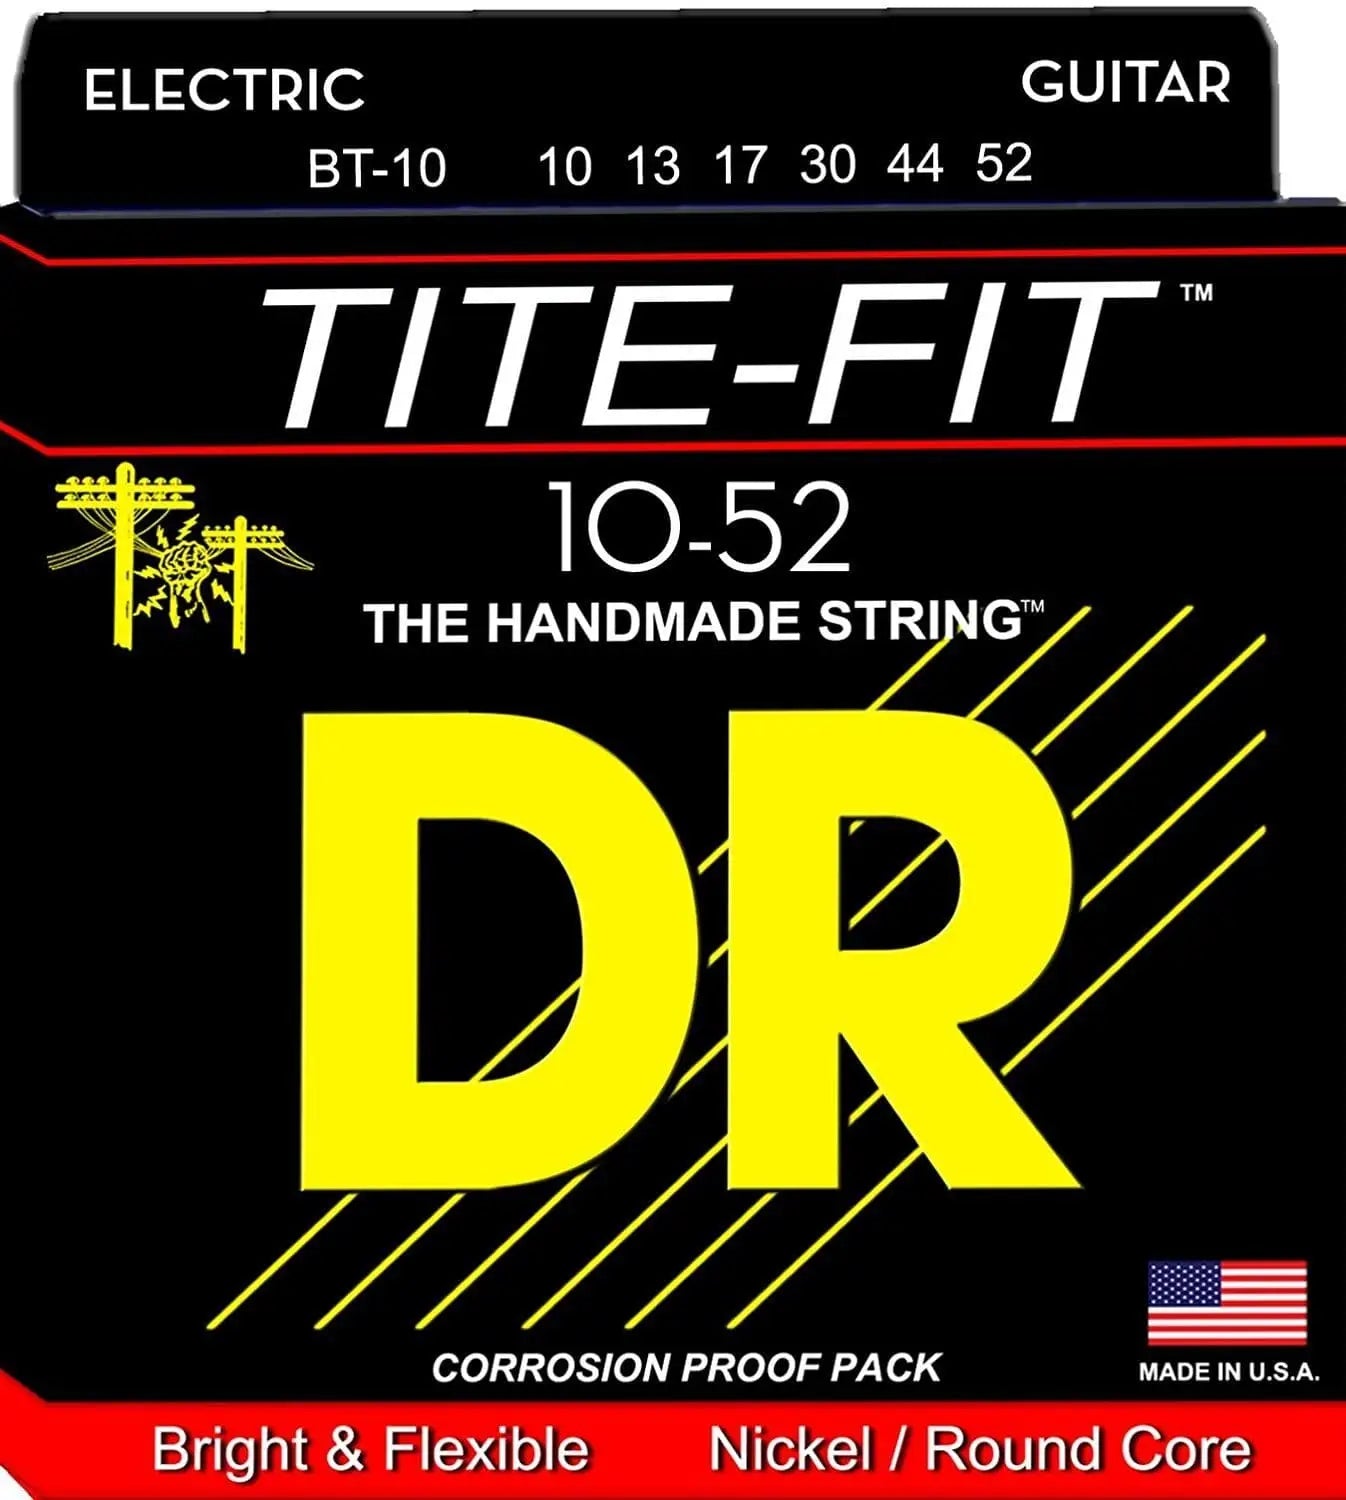 BT-10 6-String Set TITE-FIT Nickel Plated Electric Guitar Strings Medium to Heavy 10-52